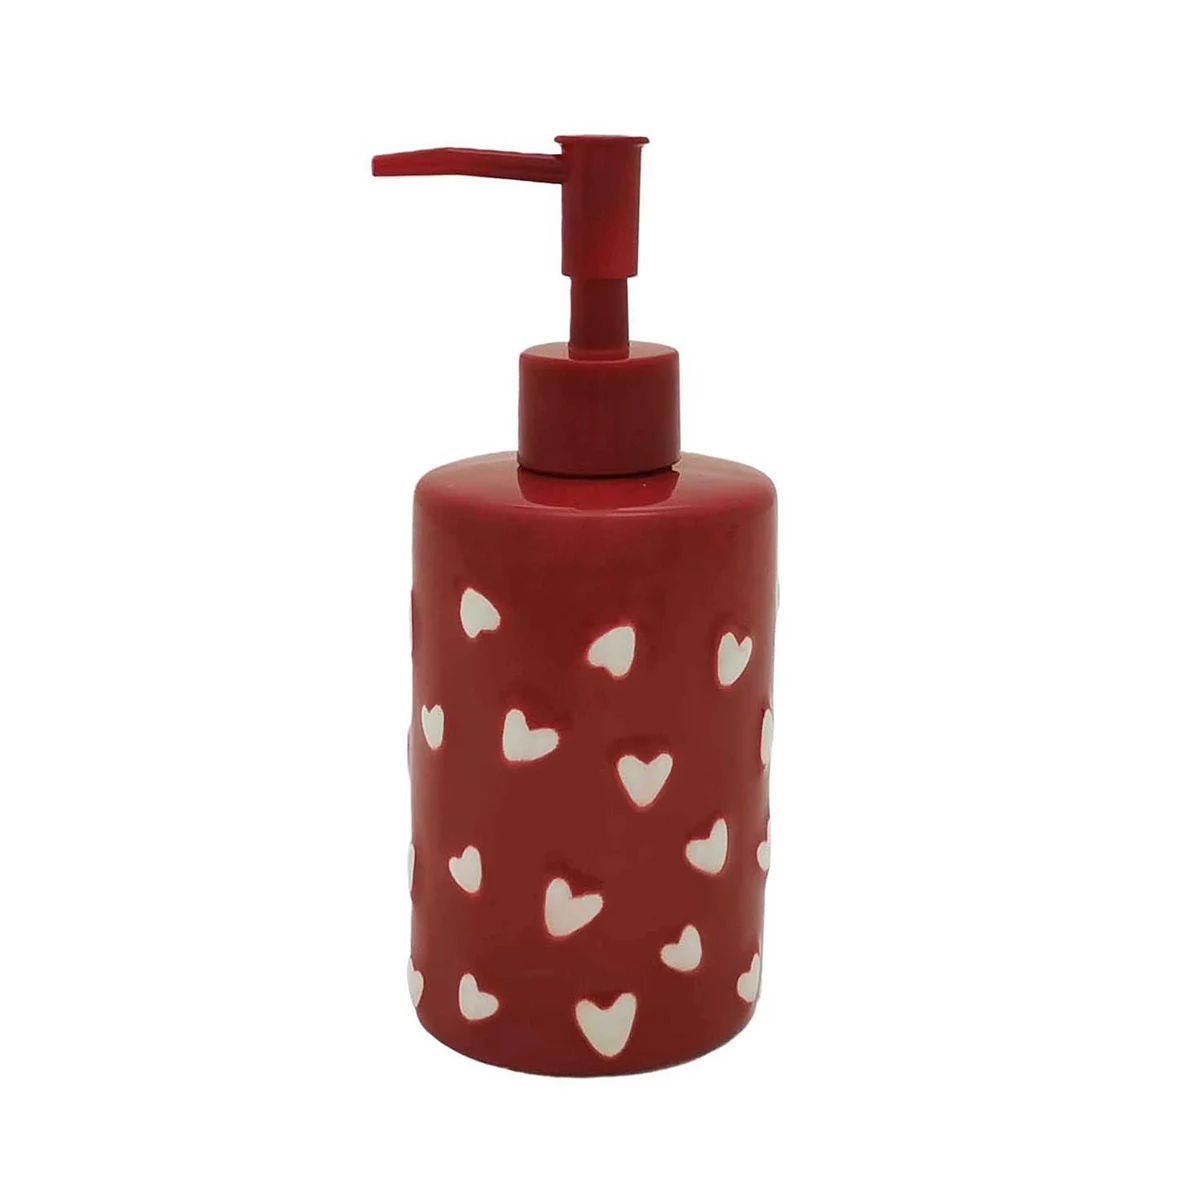 Celebrate Together™ Valentine's Day Red & White Heart Soap Pump | Kohl's